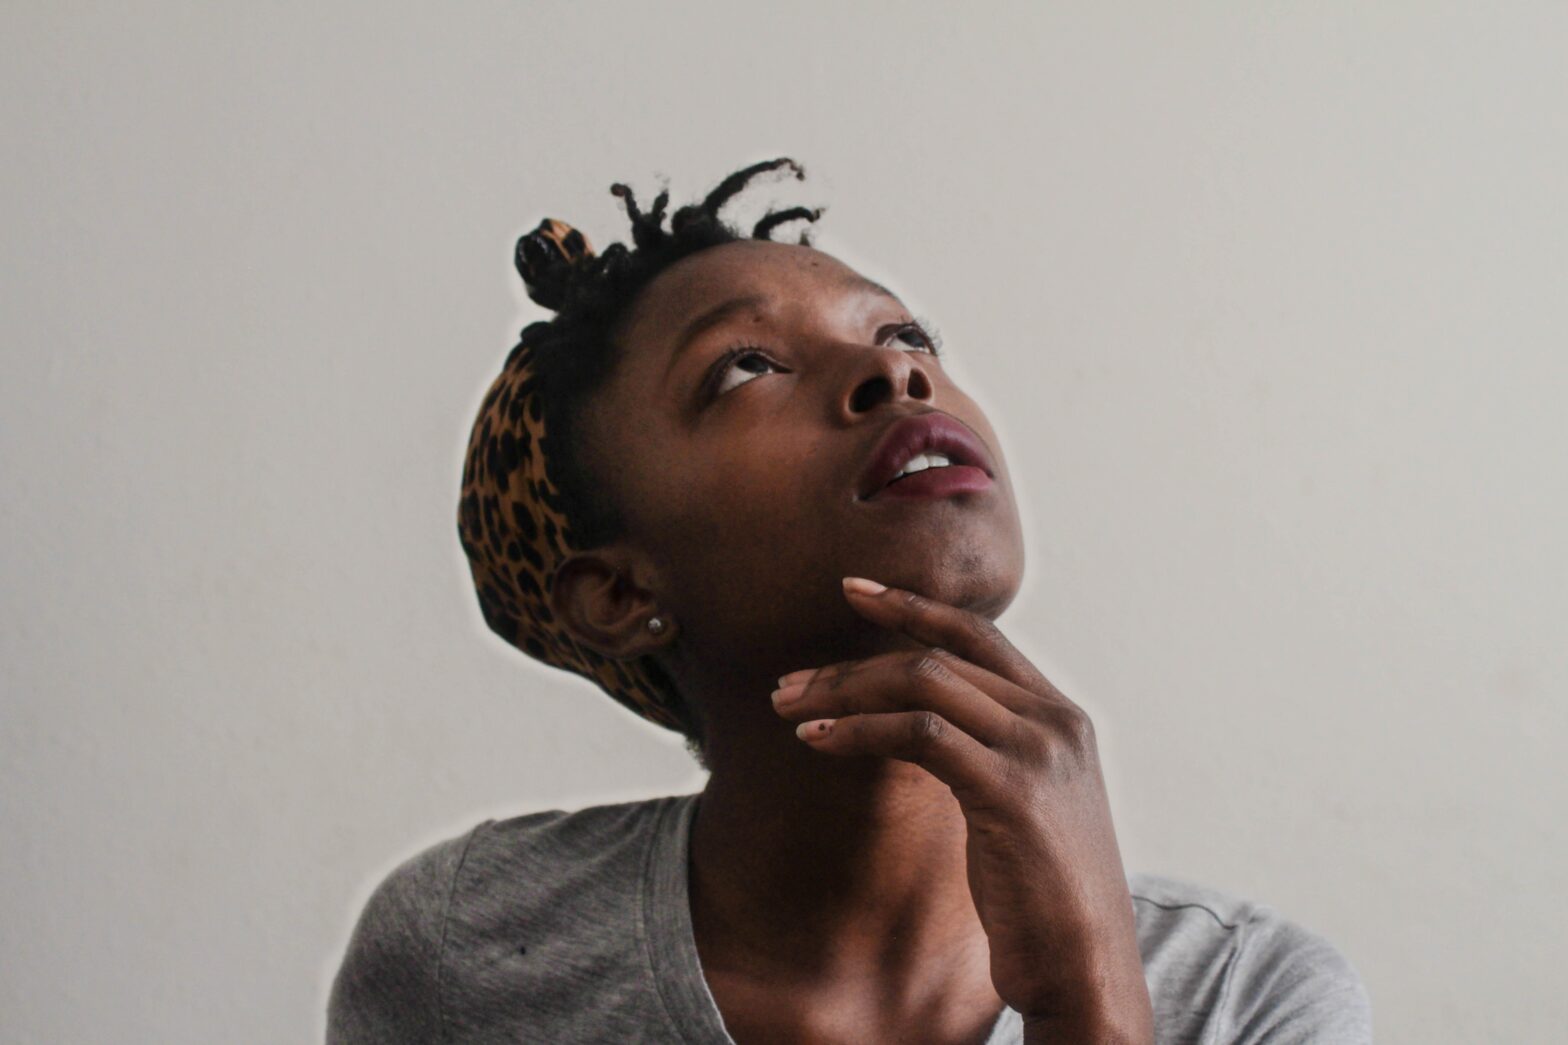 How do you get a UTI without being active? Let's debunk the myth. pictured: pensive black girl